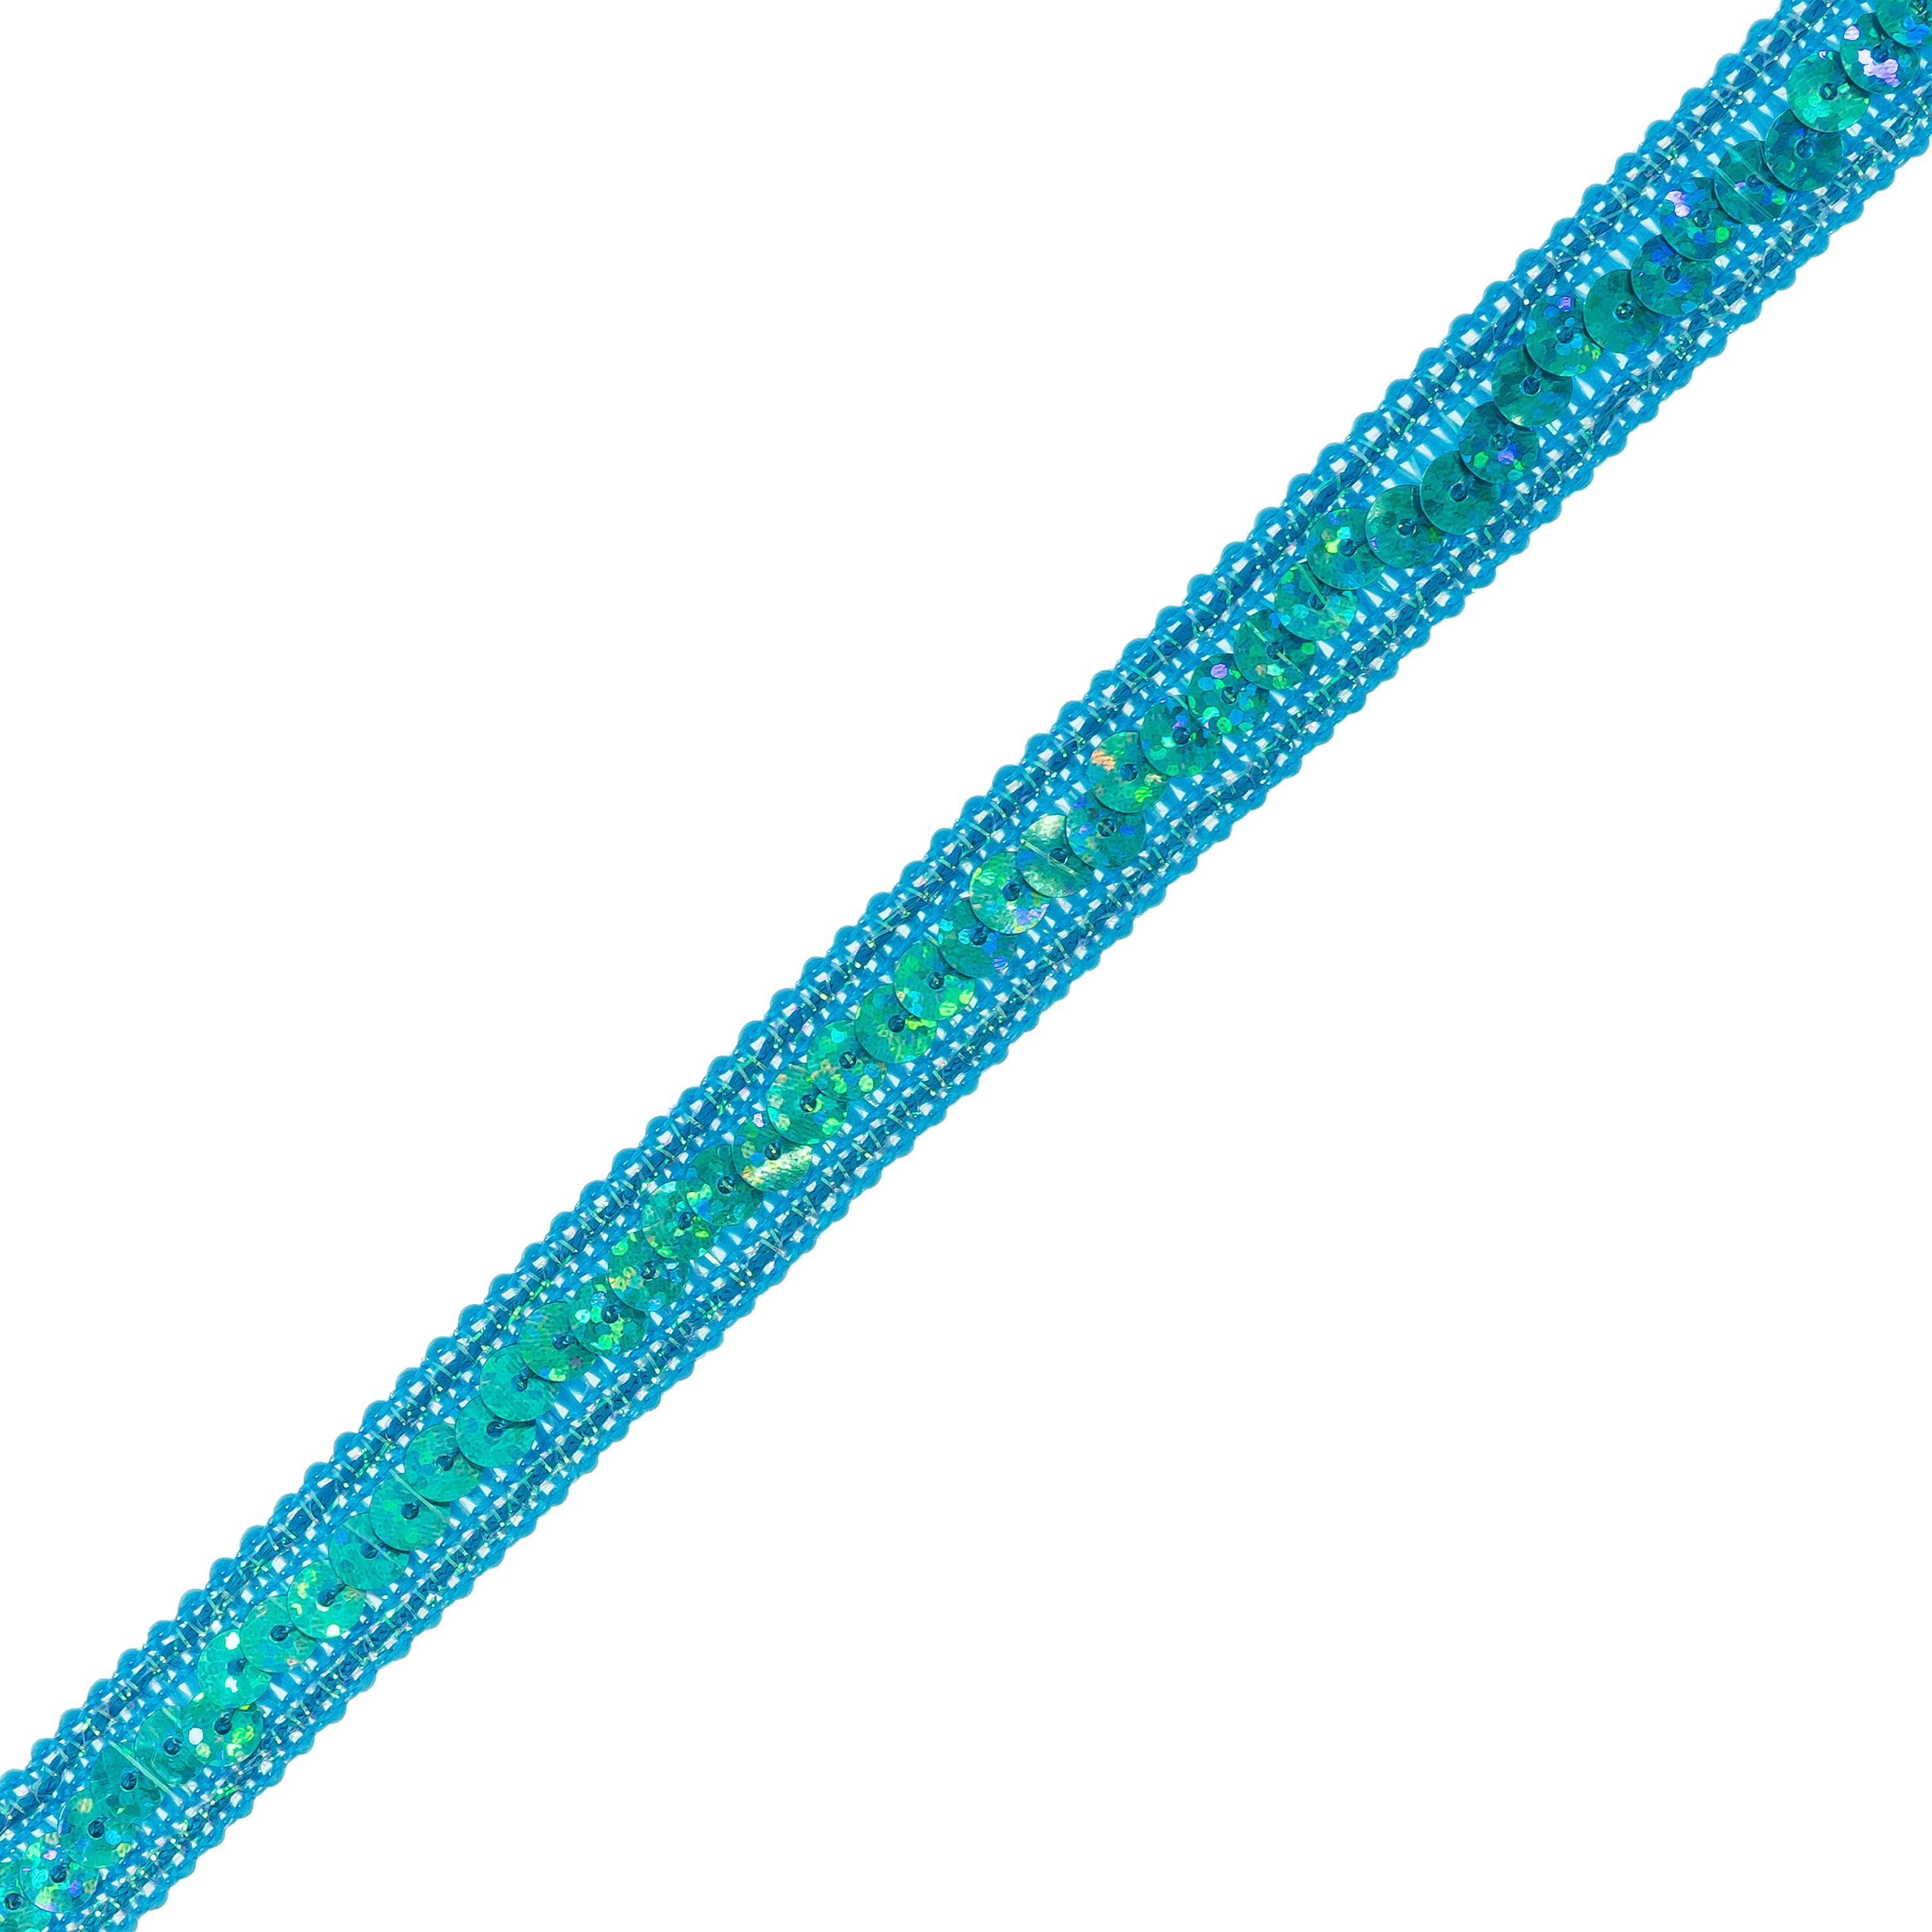 Expo Int'l Zig-Zag Sequin Ribbon Trim (1 inch) by The Yard, Blue